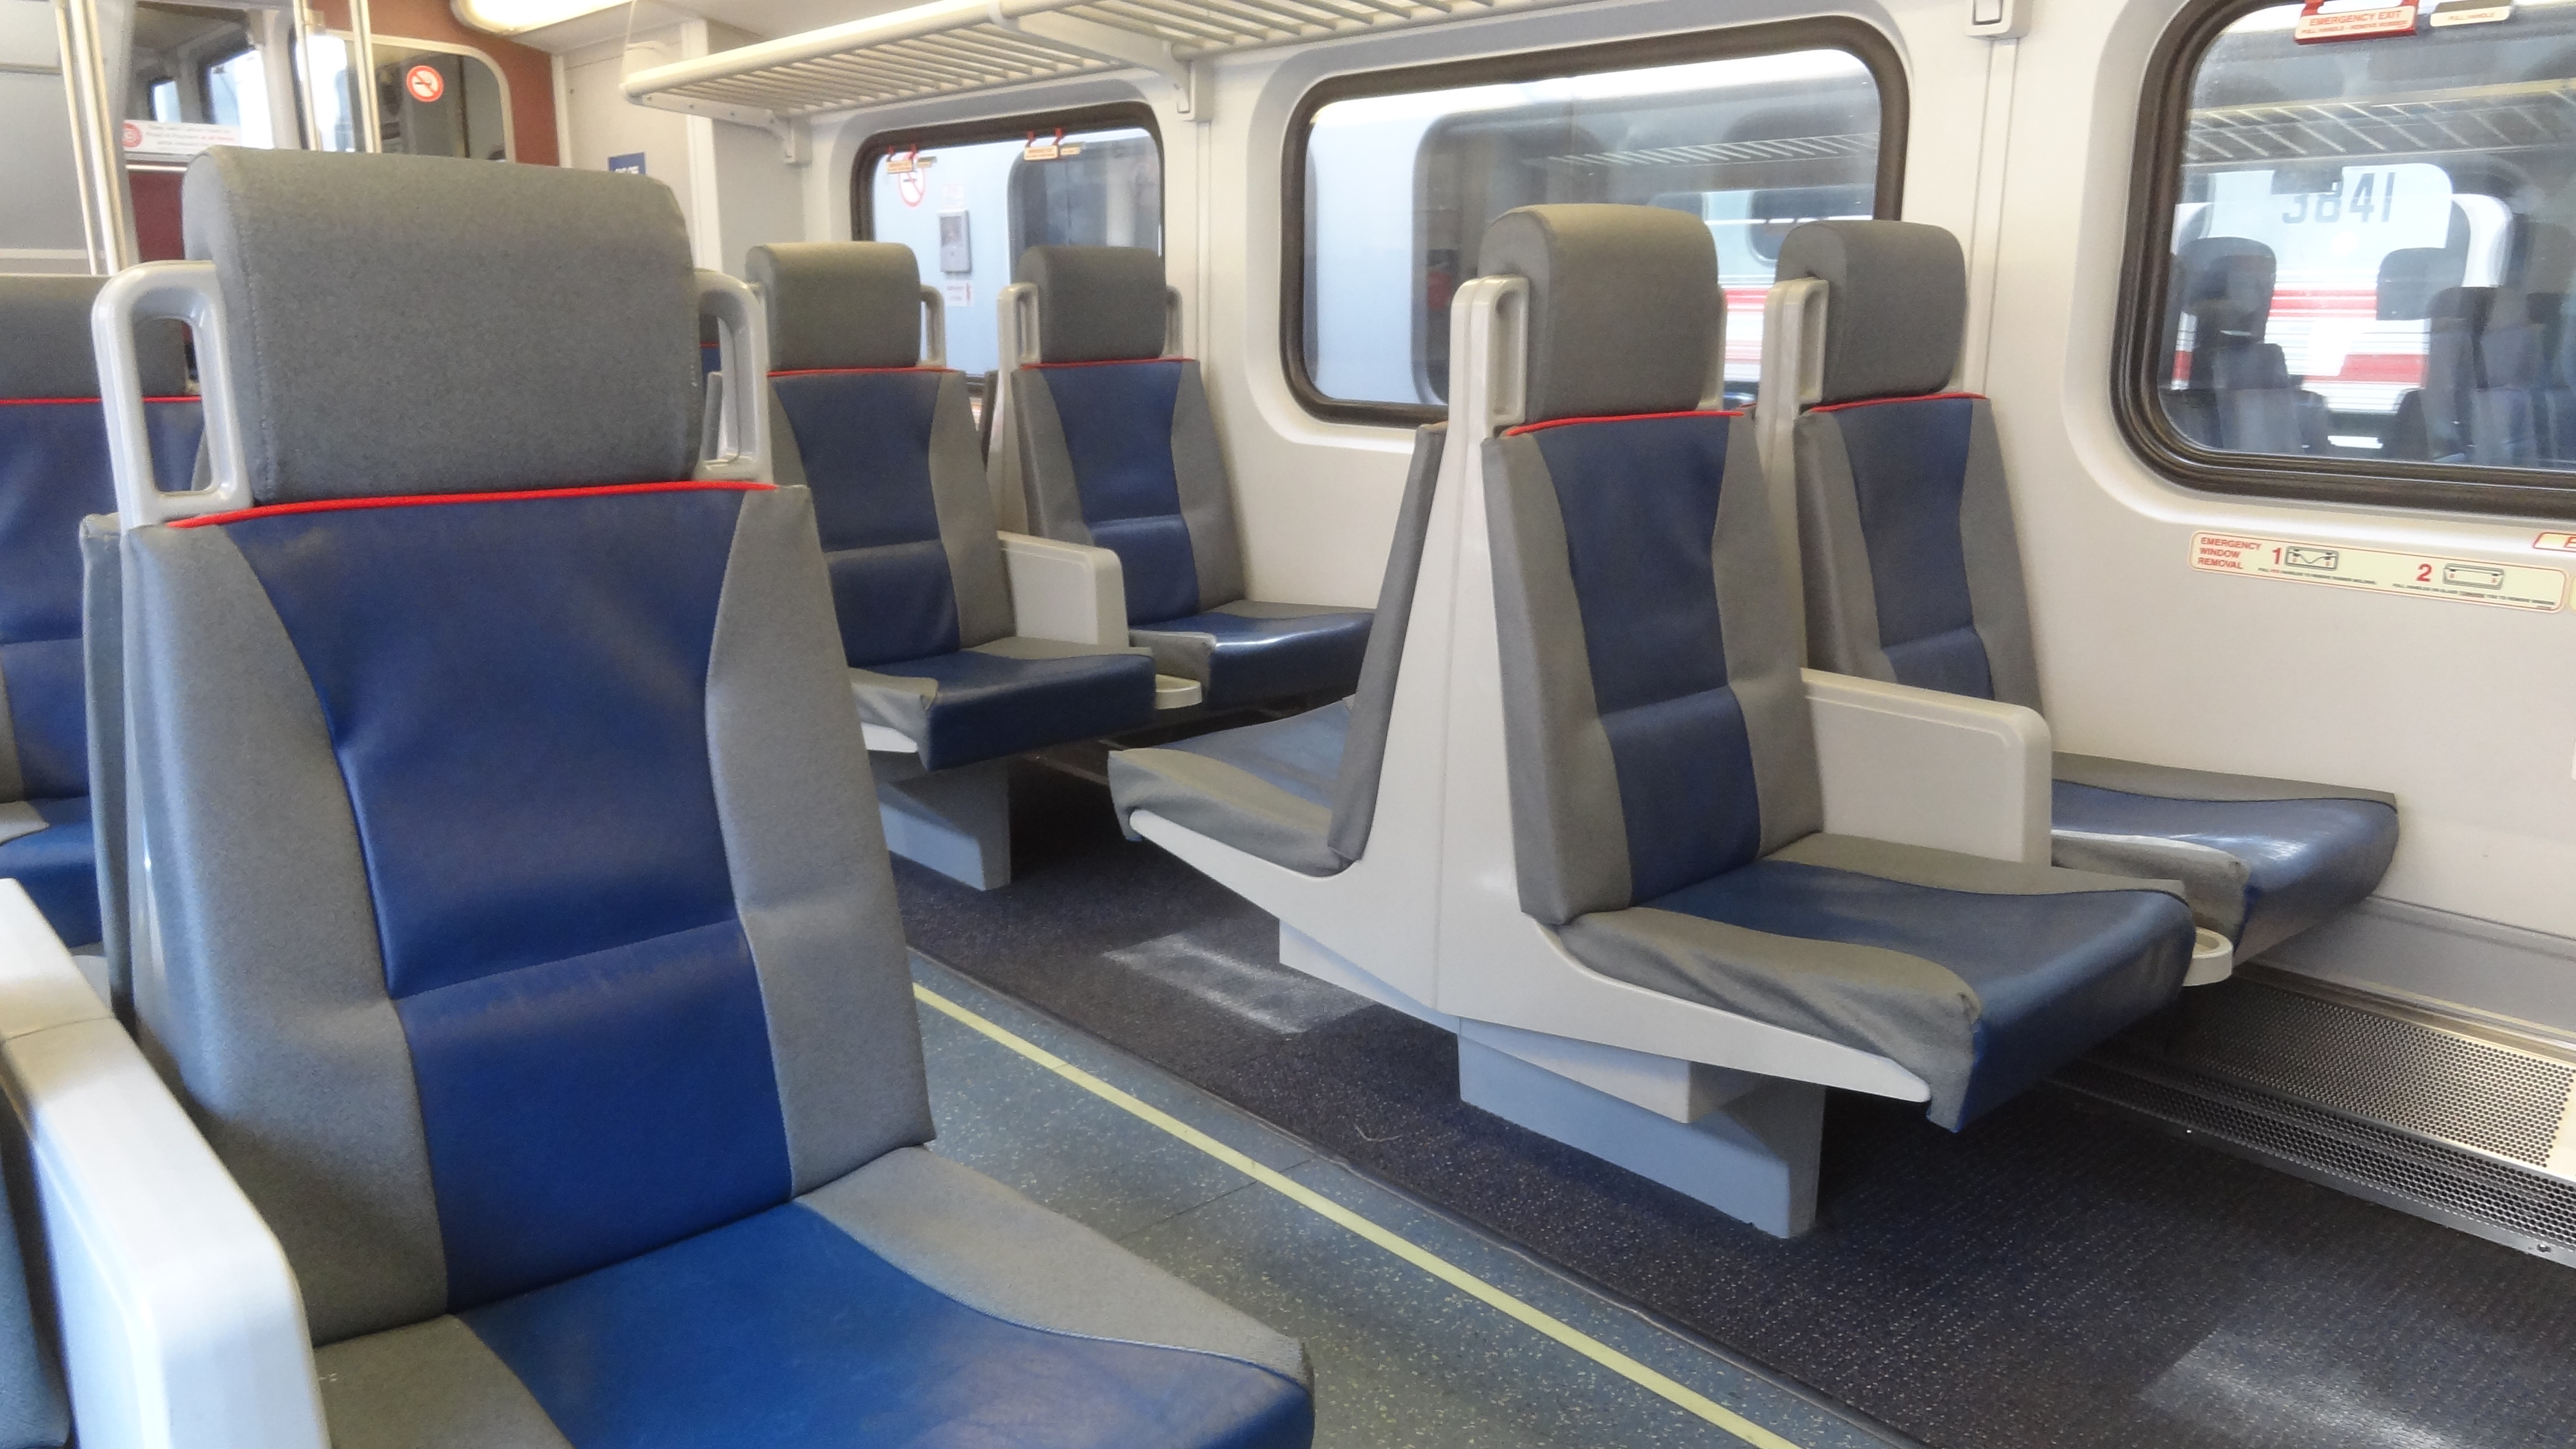 A view of the lower floor of a Bombardier Bilevel passenger car